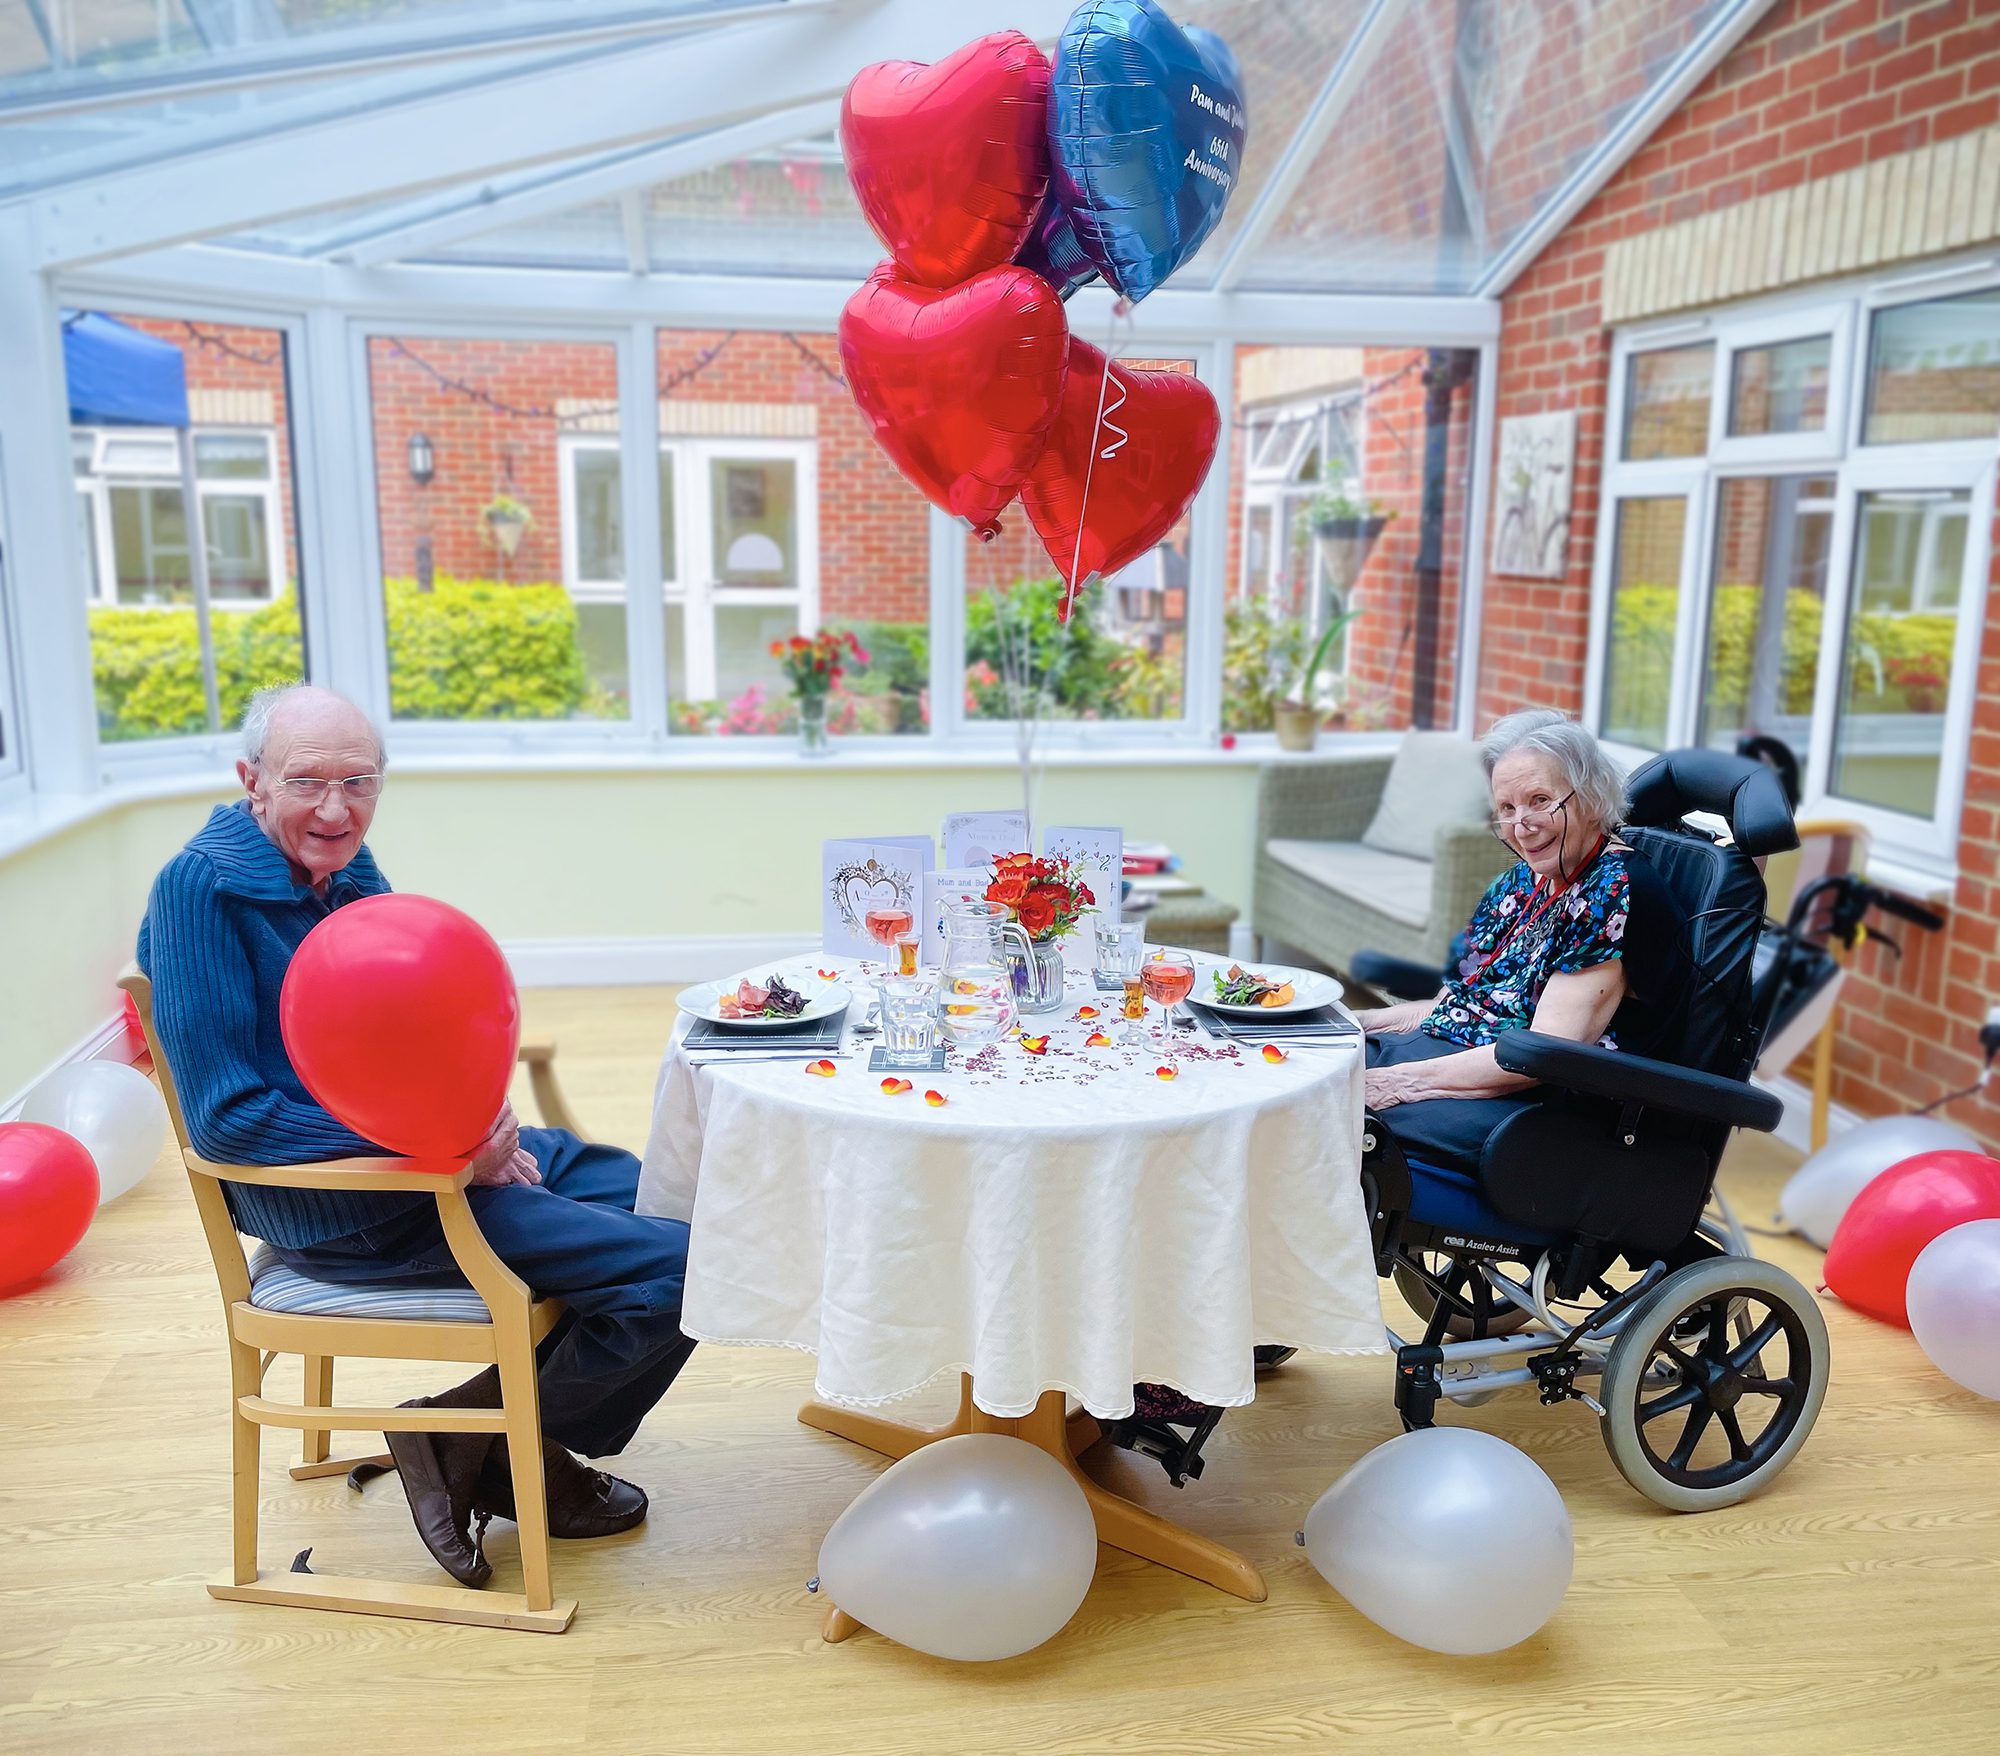 Bernard Sunley care home residents celebrating their wedding anniversary in July.